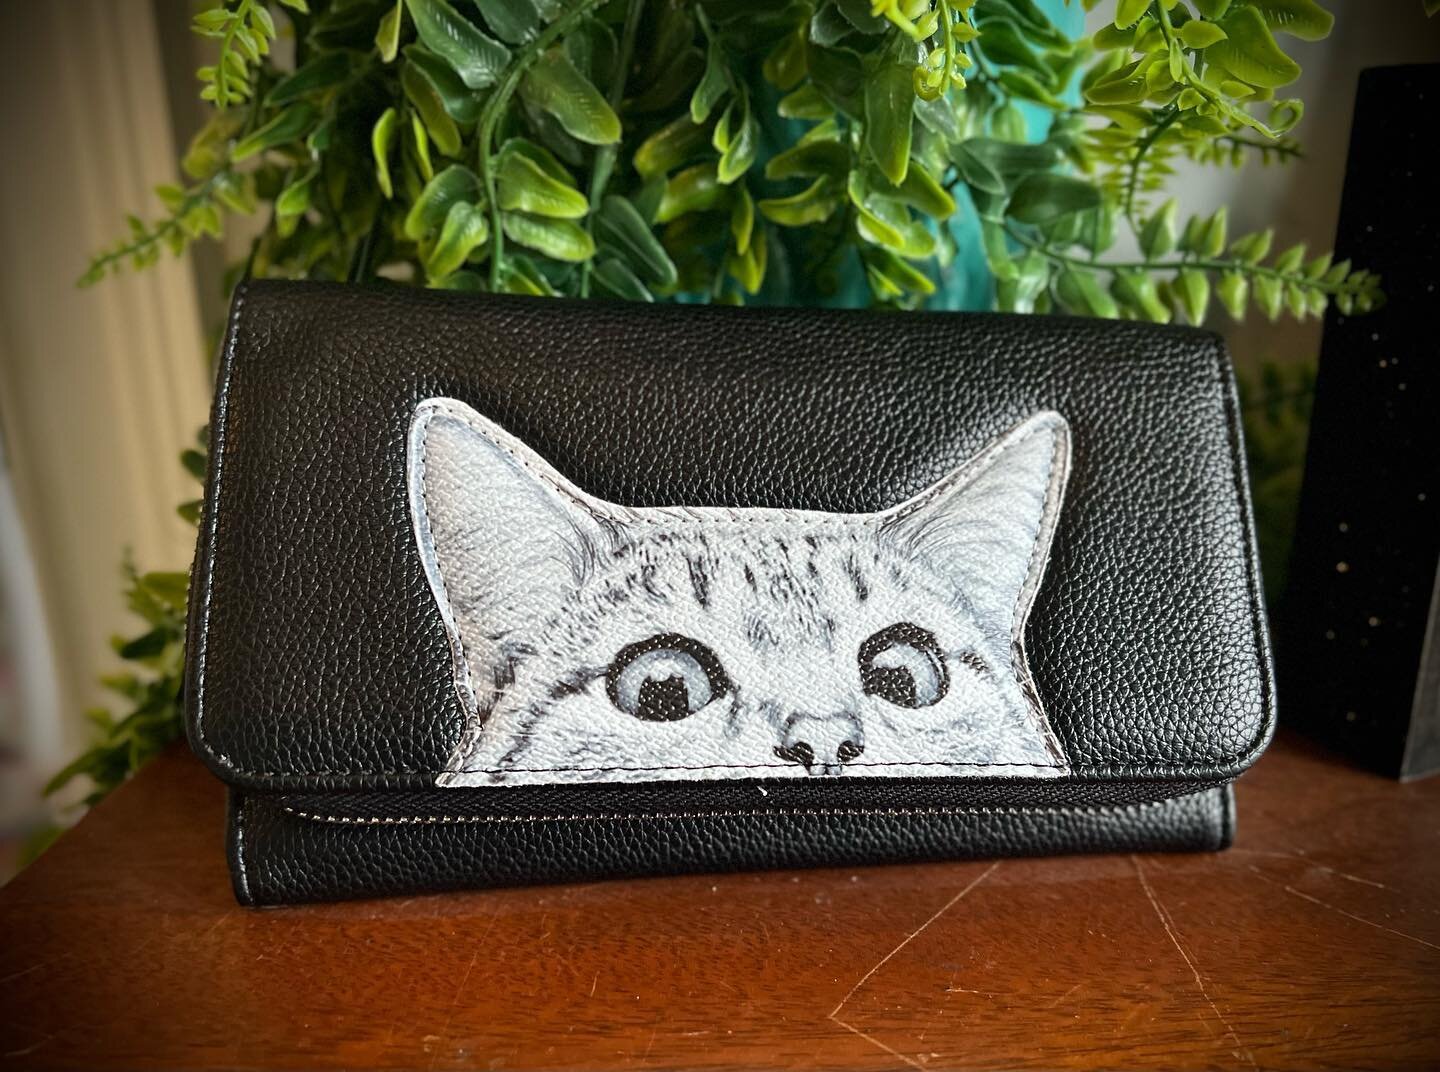 THE MOST ADORABLE PEEKING KITTY! 

With another inside for a splendid surprise 😍 Includes a 23&rdquo; max detachable strap. 

https://www.theficklehare.com/shop/p/peeking-cat-wallet

#theficklehare #comecoinc #wallet #vinylwallet #peeking #peekingca